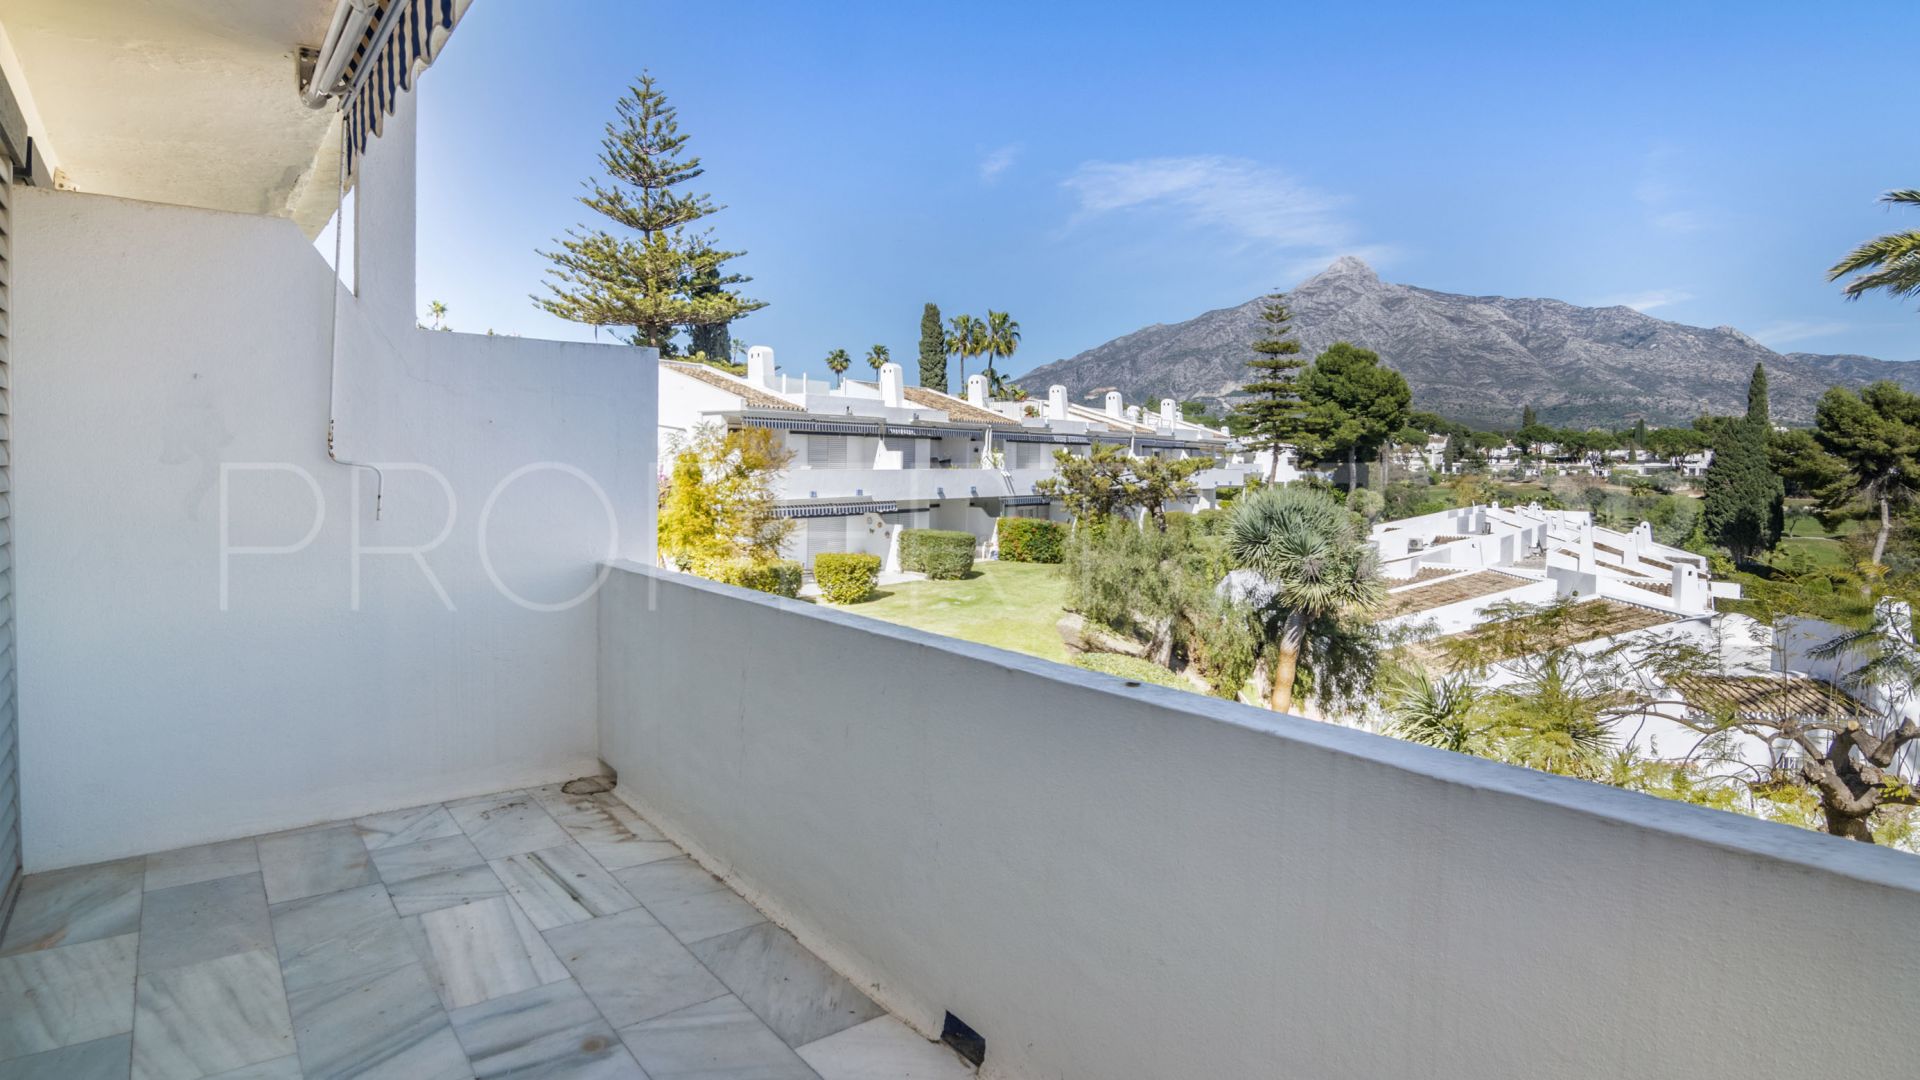 For sale 2 bedrooms duplex penthouse in Los Dragos